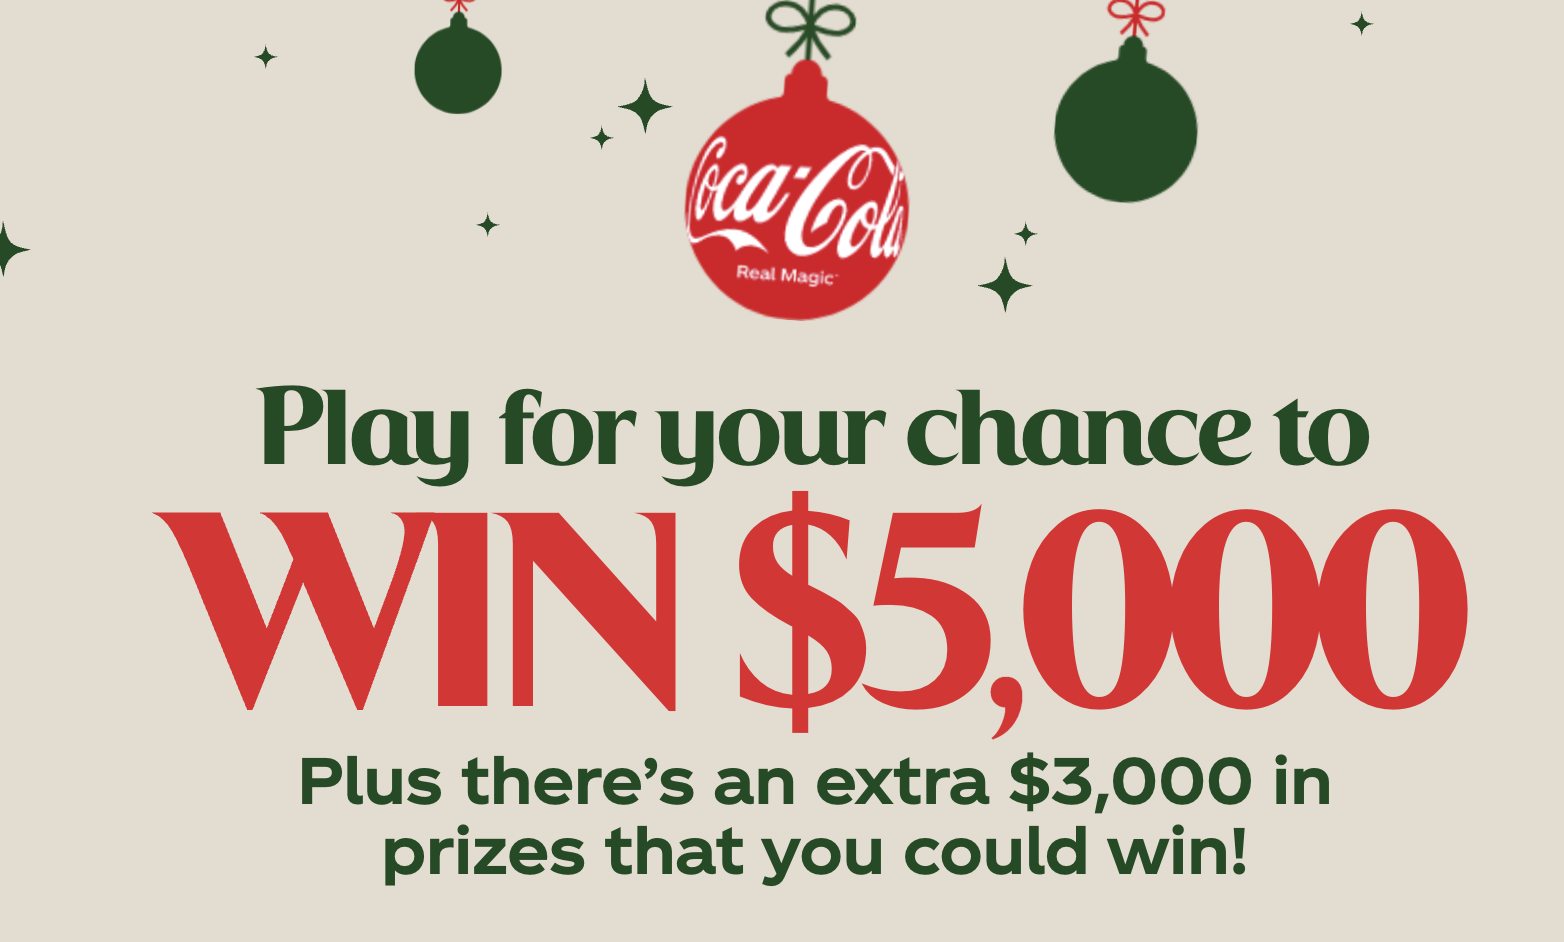 Sodexo CocaCola "Taste the Holiday Magic" Sweepstakes (5 Winners